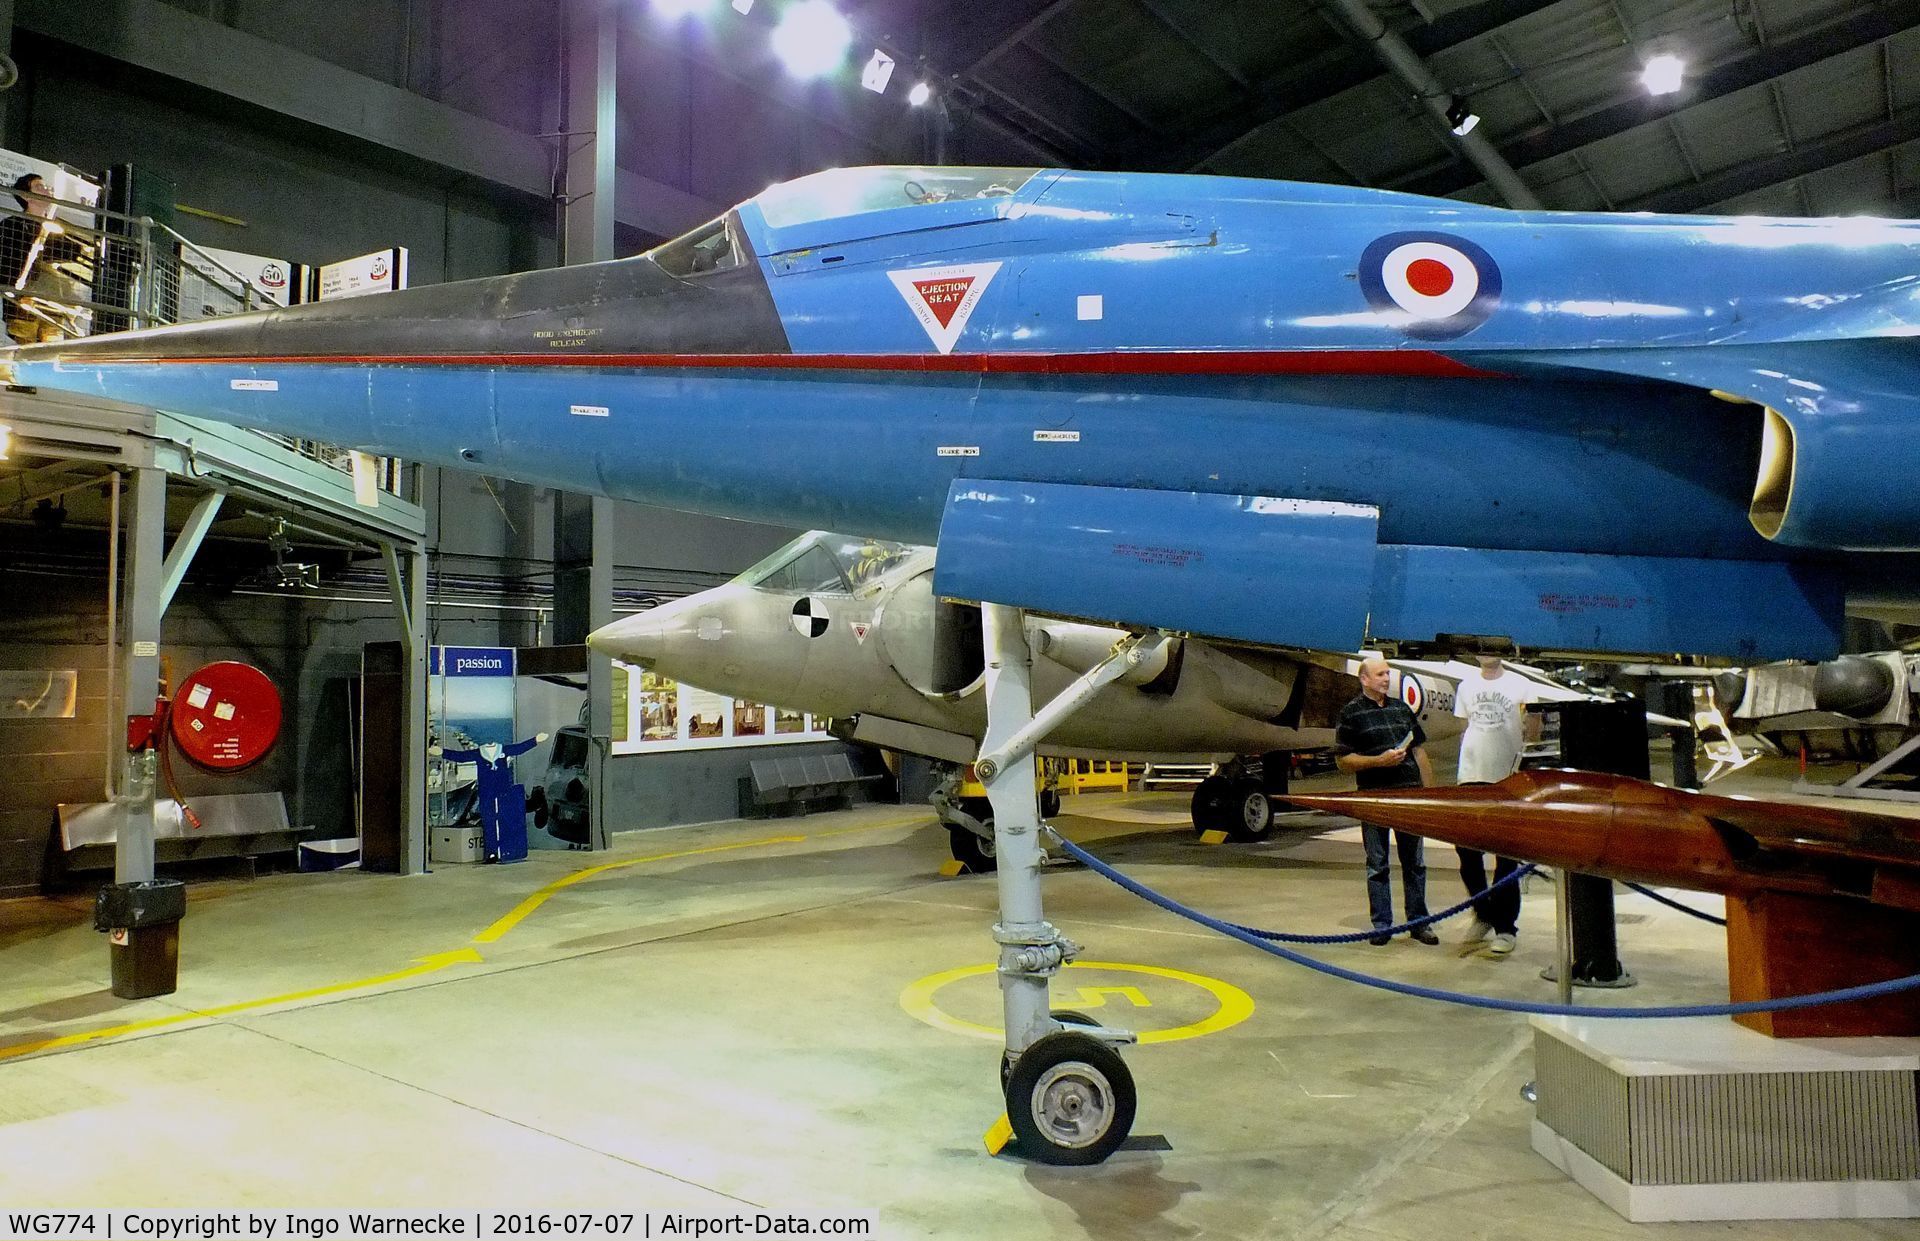 WG774, BAC 221 C/N F.9421, Fairey Delta FD2, converted to BAC 221 testbed for Concorde ogival wing, at the FAA Museum, Yeovilton